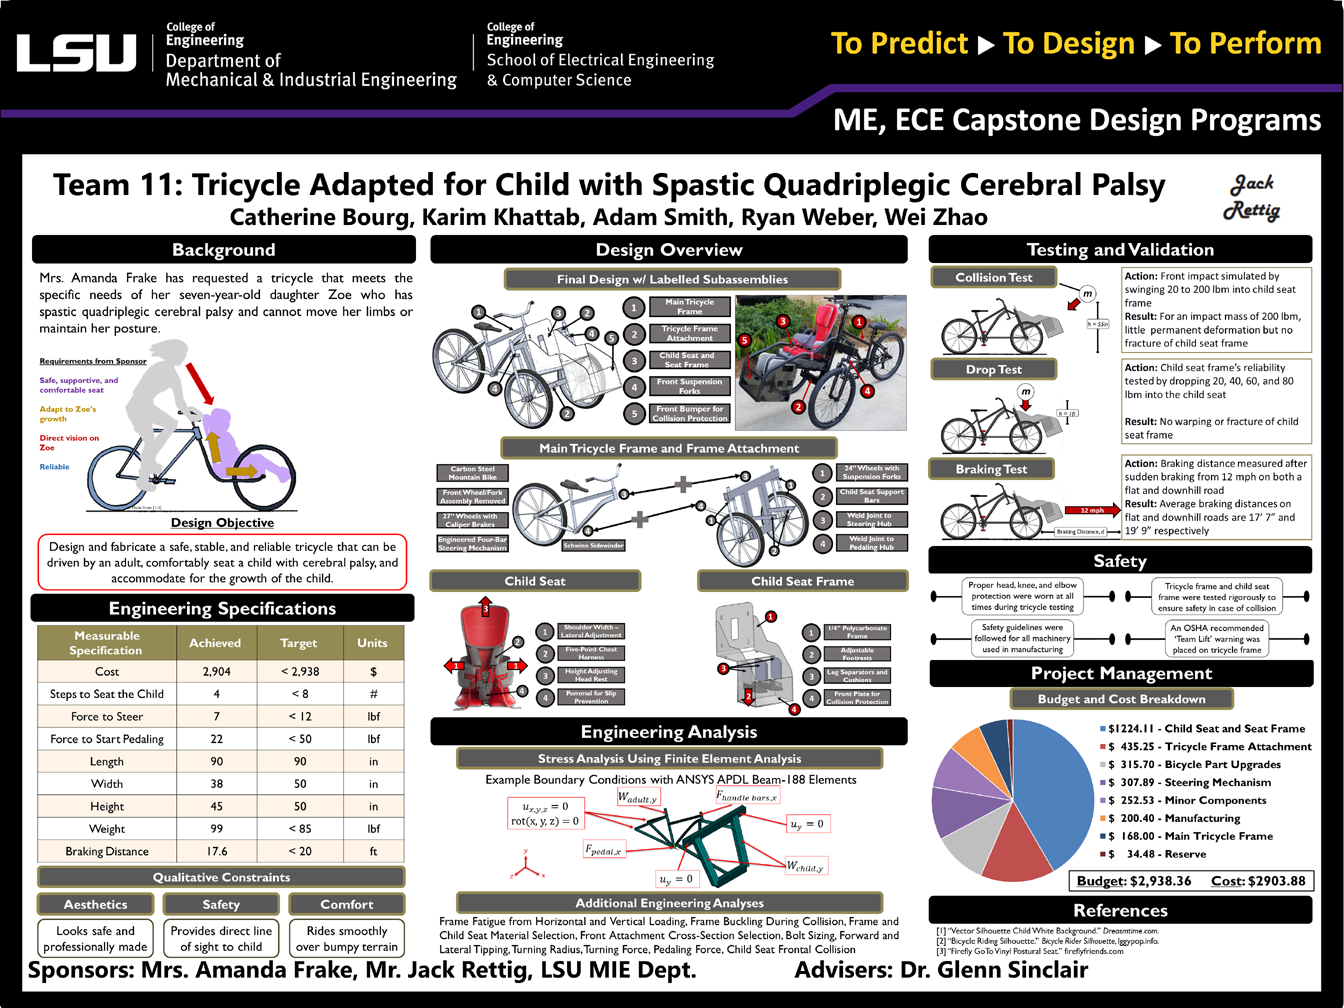 Project 11: Adaptive Tricycle (2019)